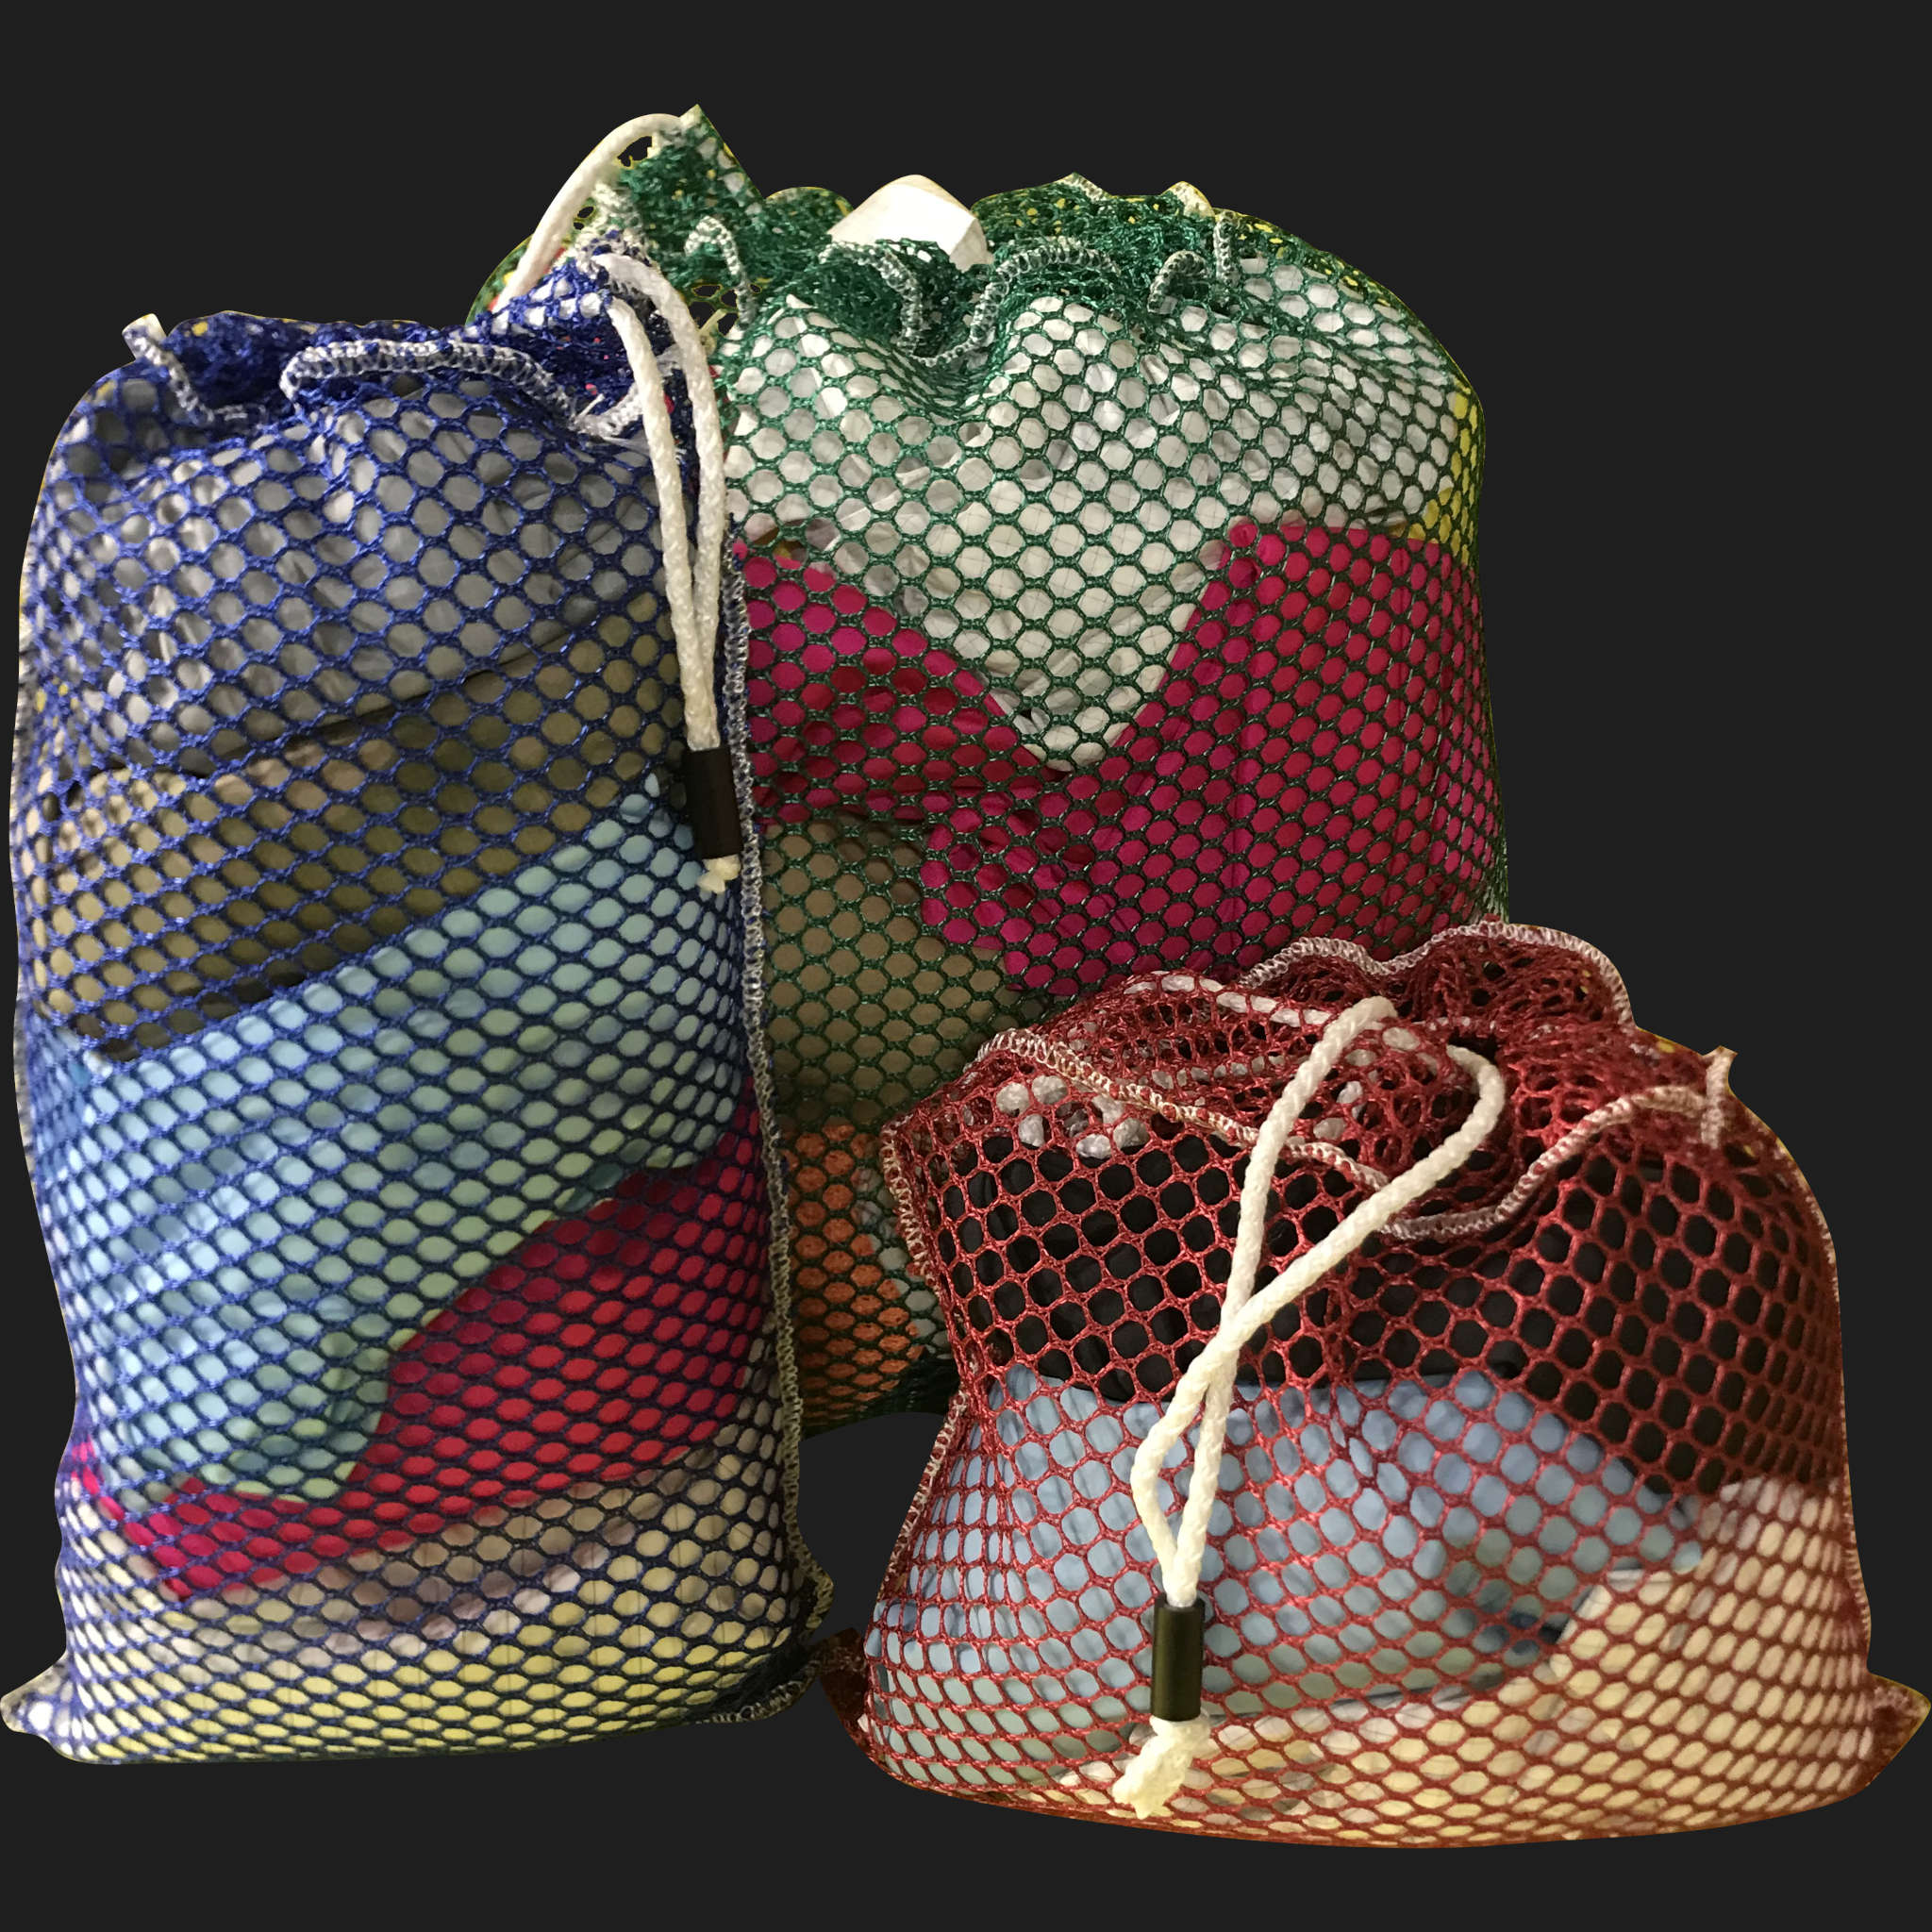 36" x 60" Customized Mesh-Net-Laundry Bags Heavy Duty with Cord and barrellock closure